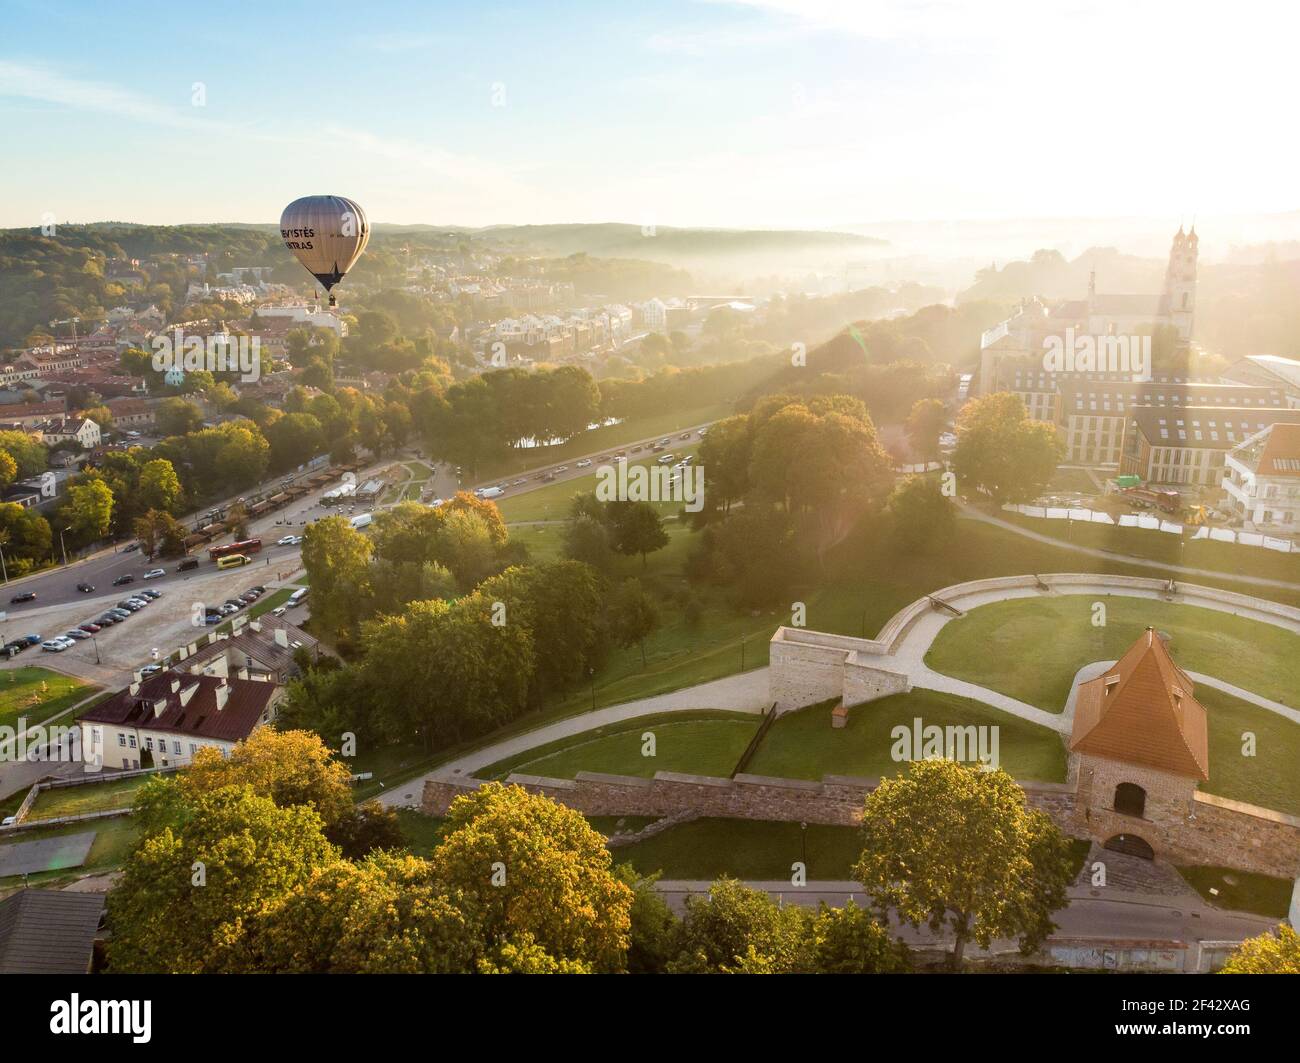 VILNIUS, LITHUANIA - AUGUST 20, 2020: Colorful hot air balloons taking off in Old town of Vilnius city on sunny summer morning. Lots of people watchin Stock Photo